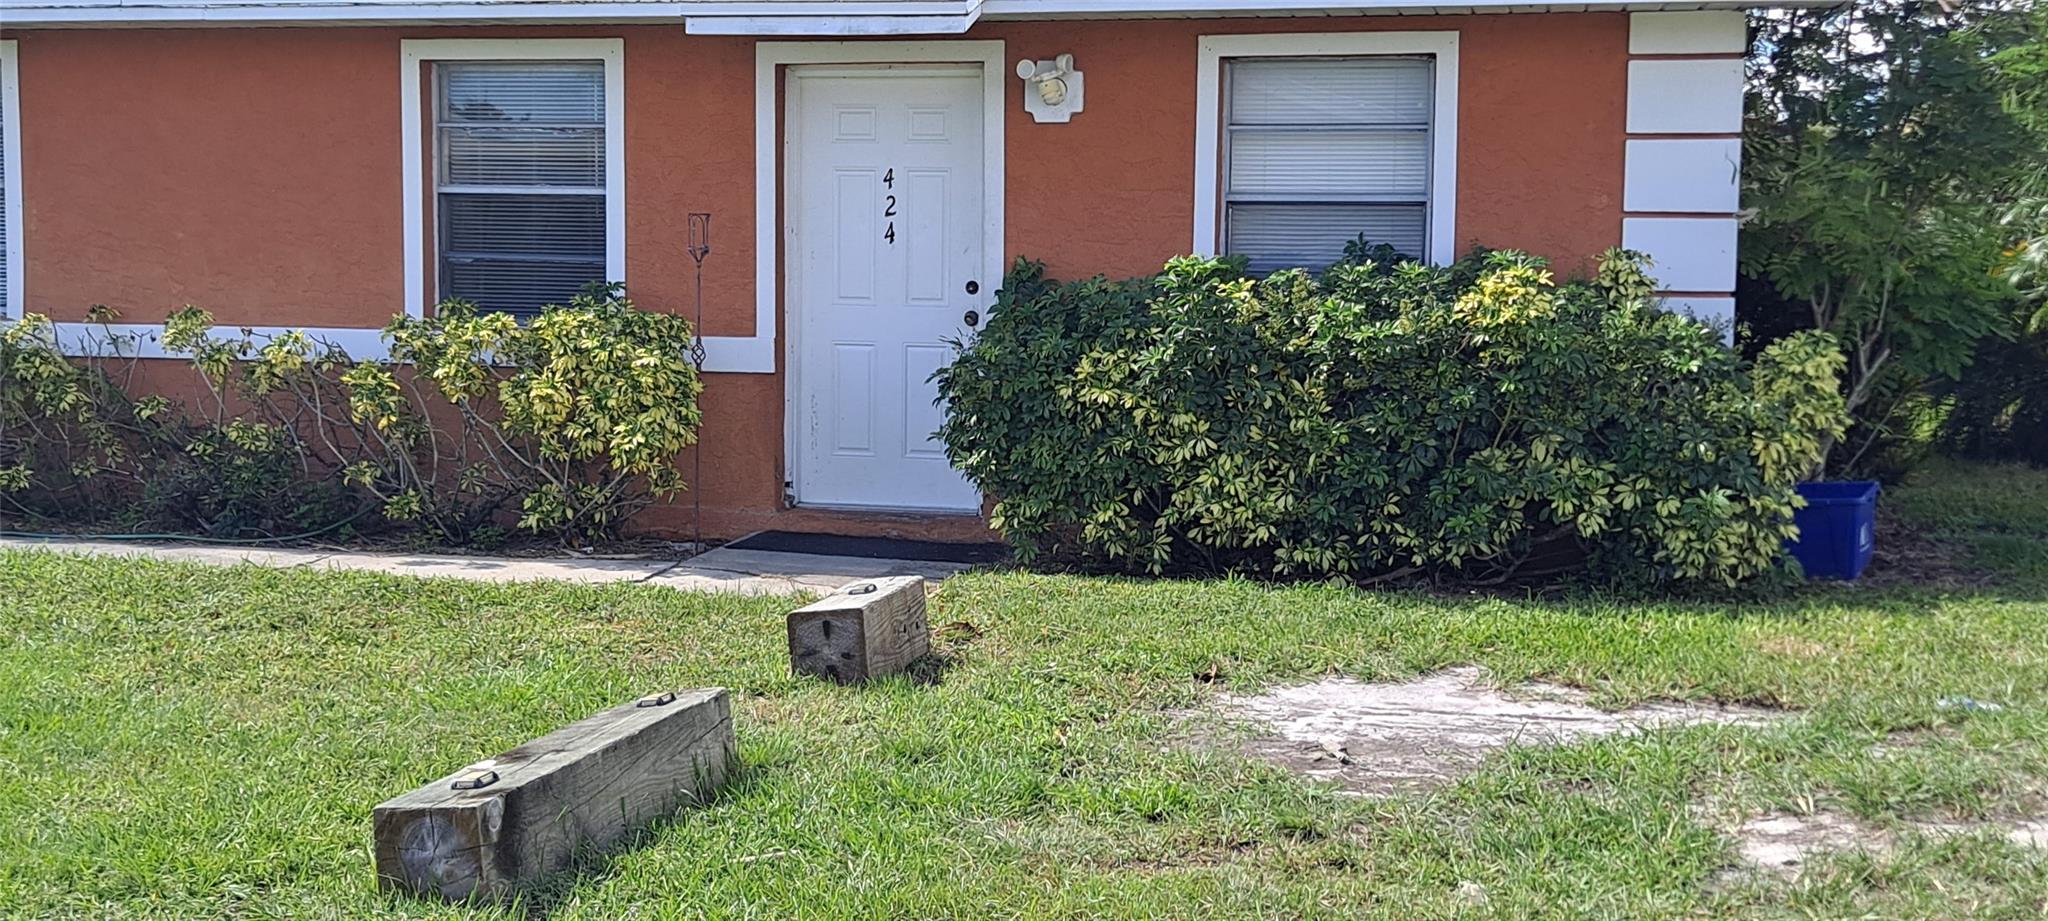 In city limits of Okeechobee, walking distance to restaurants, shopping, & schools. 2 bedroom 1 bath apartment for rent in a triplex setting. First, last, & Security required with one year lease. Background check required for all adults.